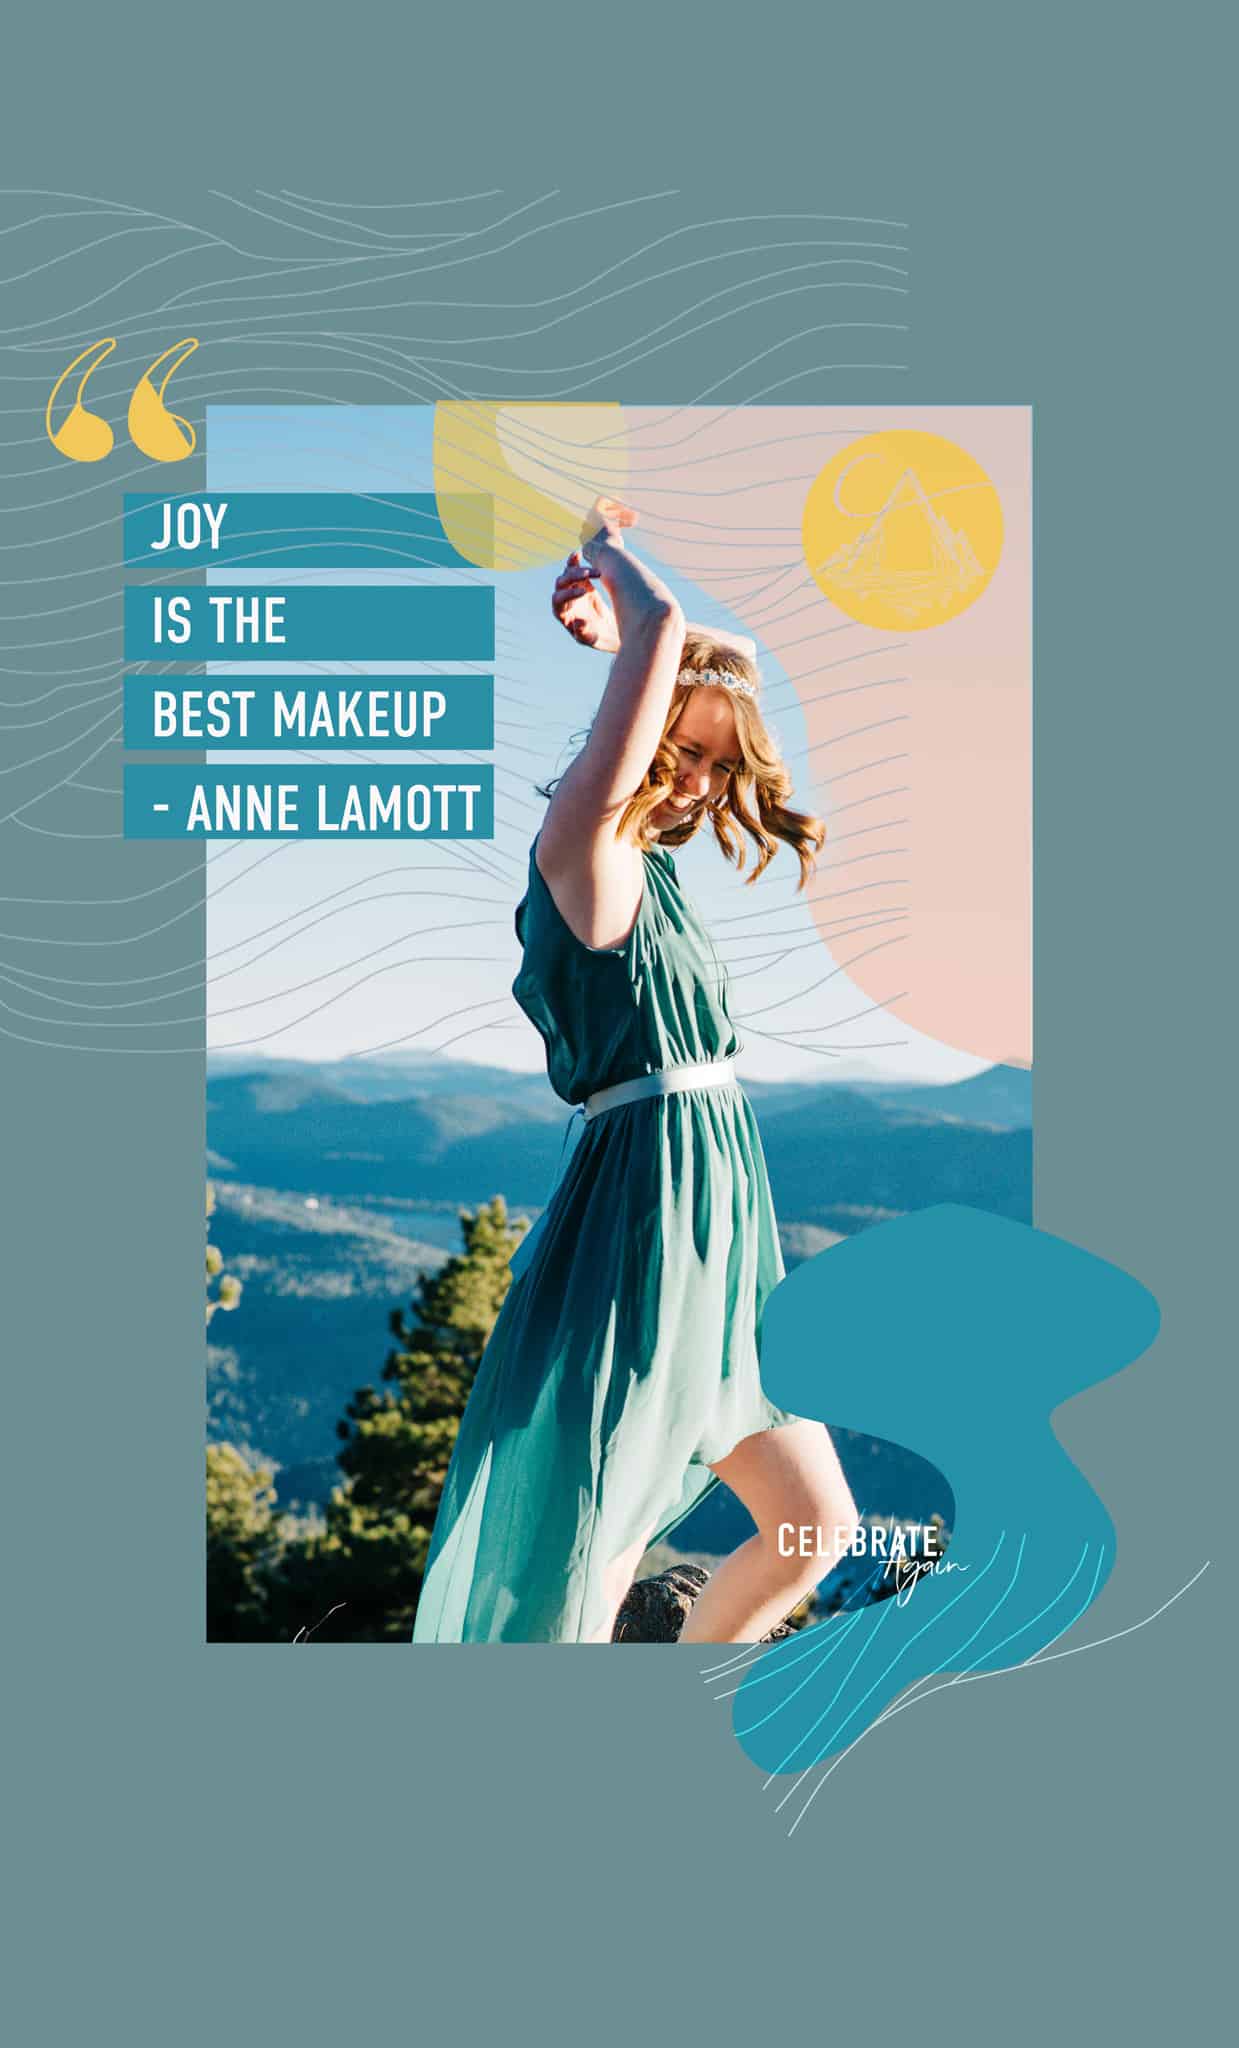 "joy is the best makeup" - anne lamott quote with graphics of a photo of female smiling laughing standing on top of a mountain